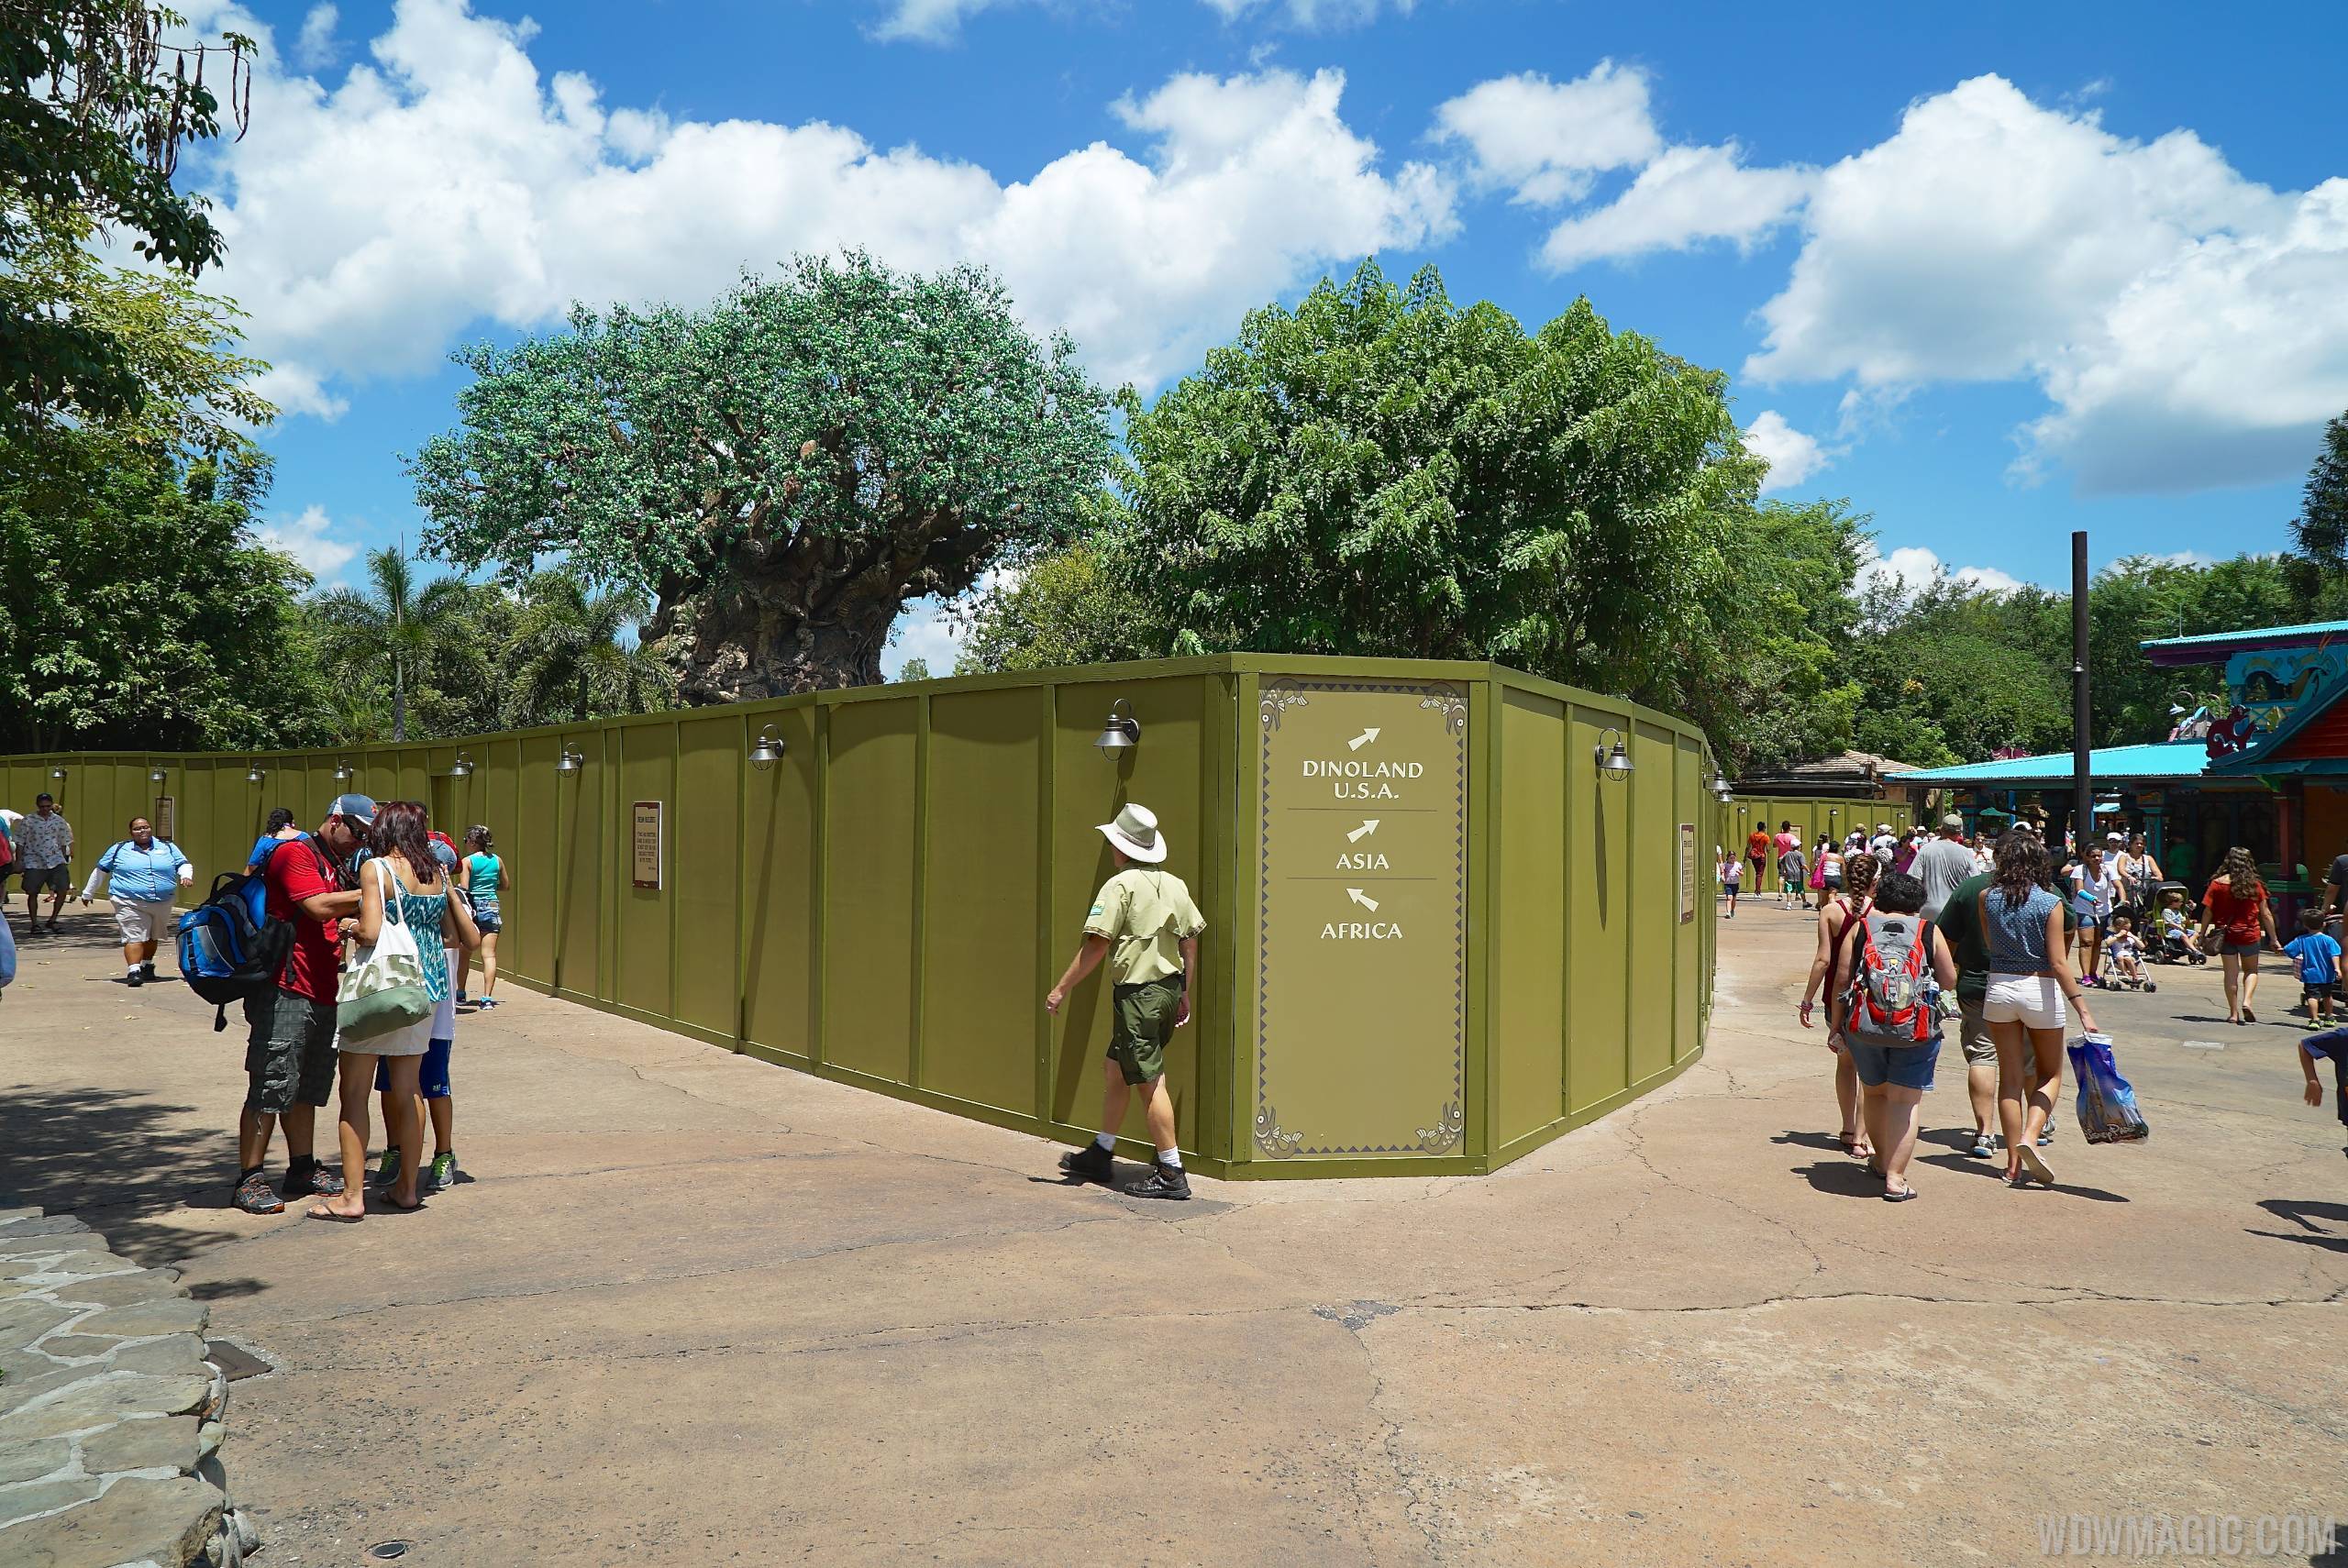 PHOTOS - Latest look at the Discovery Island construction at Disney's Animal Kingdom